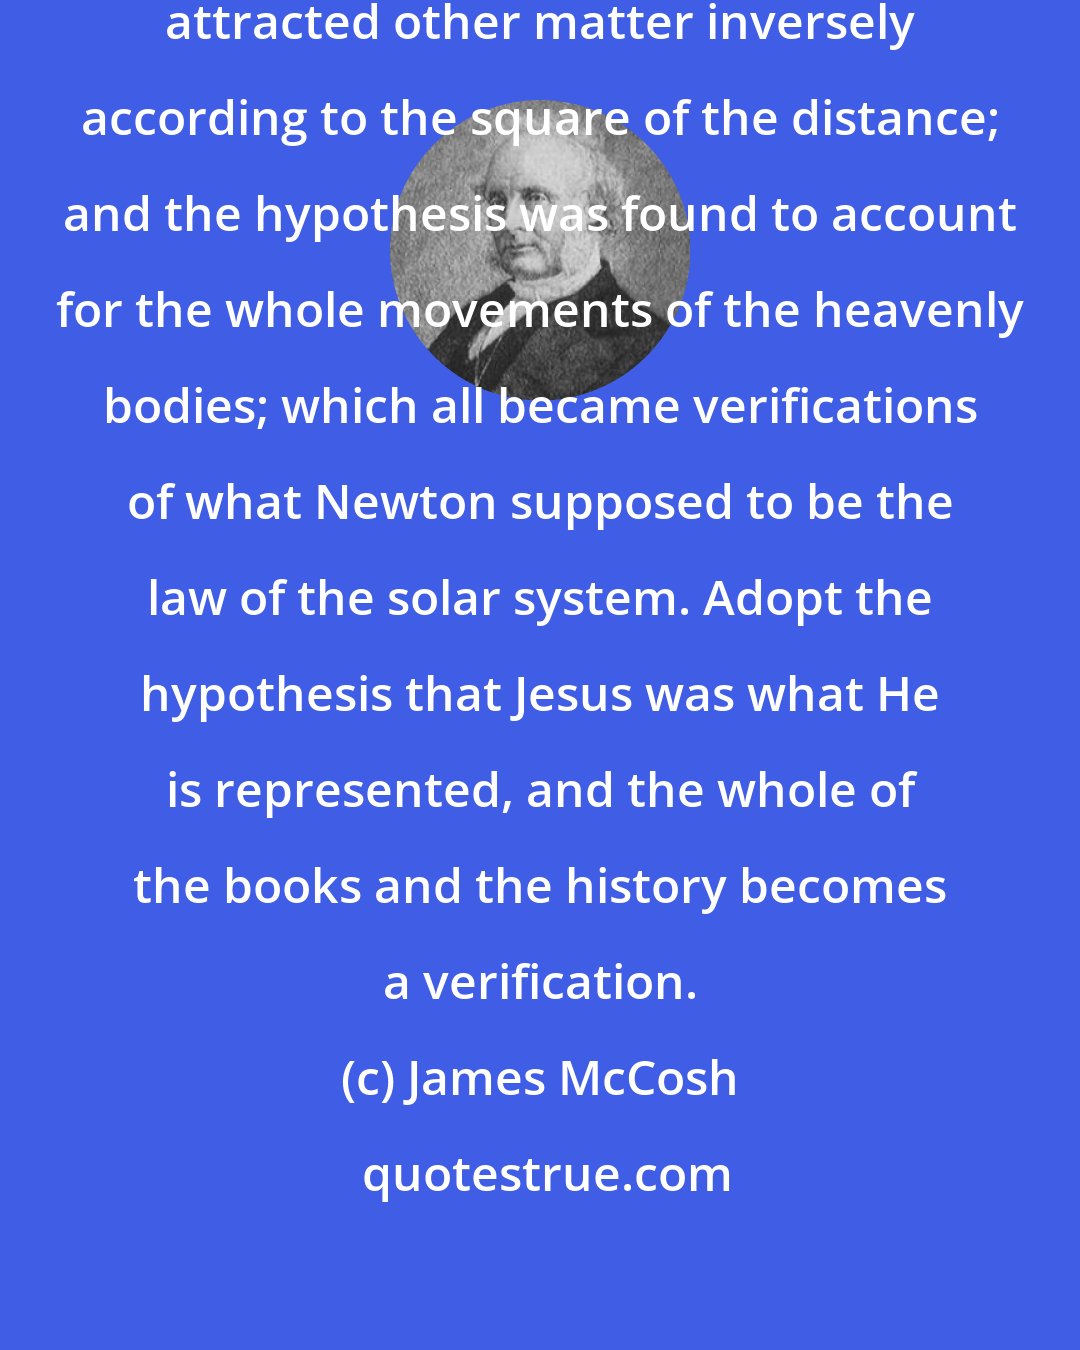 James McCosh: Newton supposed that all matter attracted other matter inversely according to the square of the distance; and the hypothesis was found to account for the whole movements of the heavenly bodies; which all became verifications of what Newton supposed to be the law of the solar system. Adopt the hypothesis that Jesus was what He is represented, and the whole of the books and the history becomes a verification.